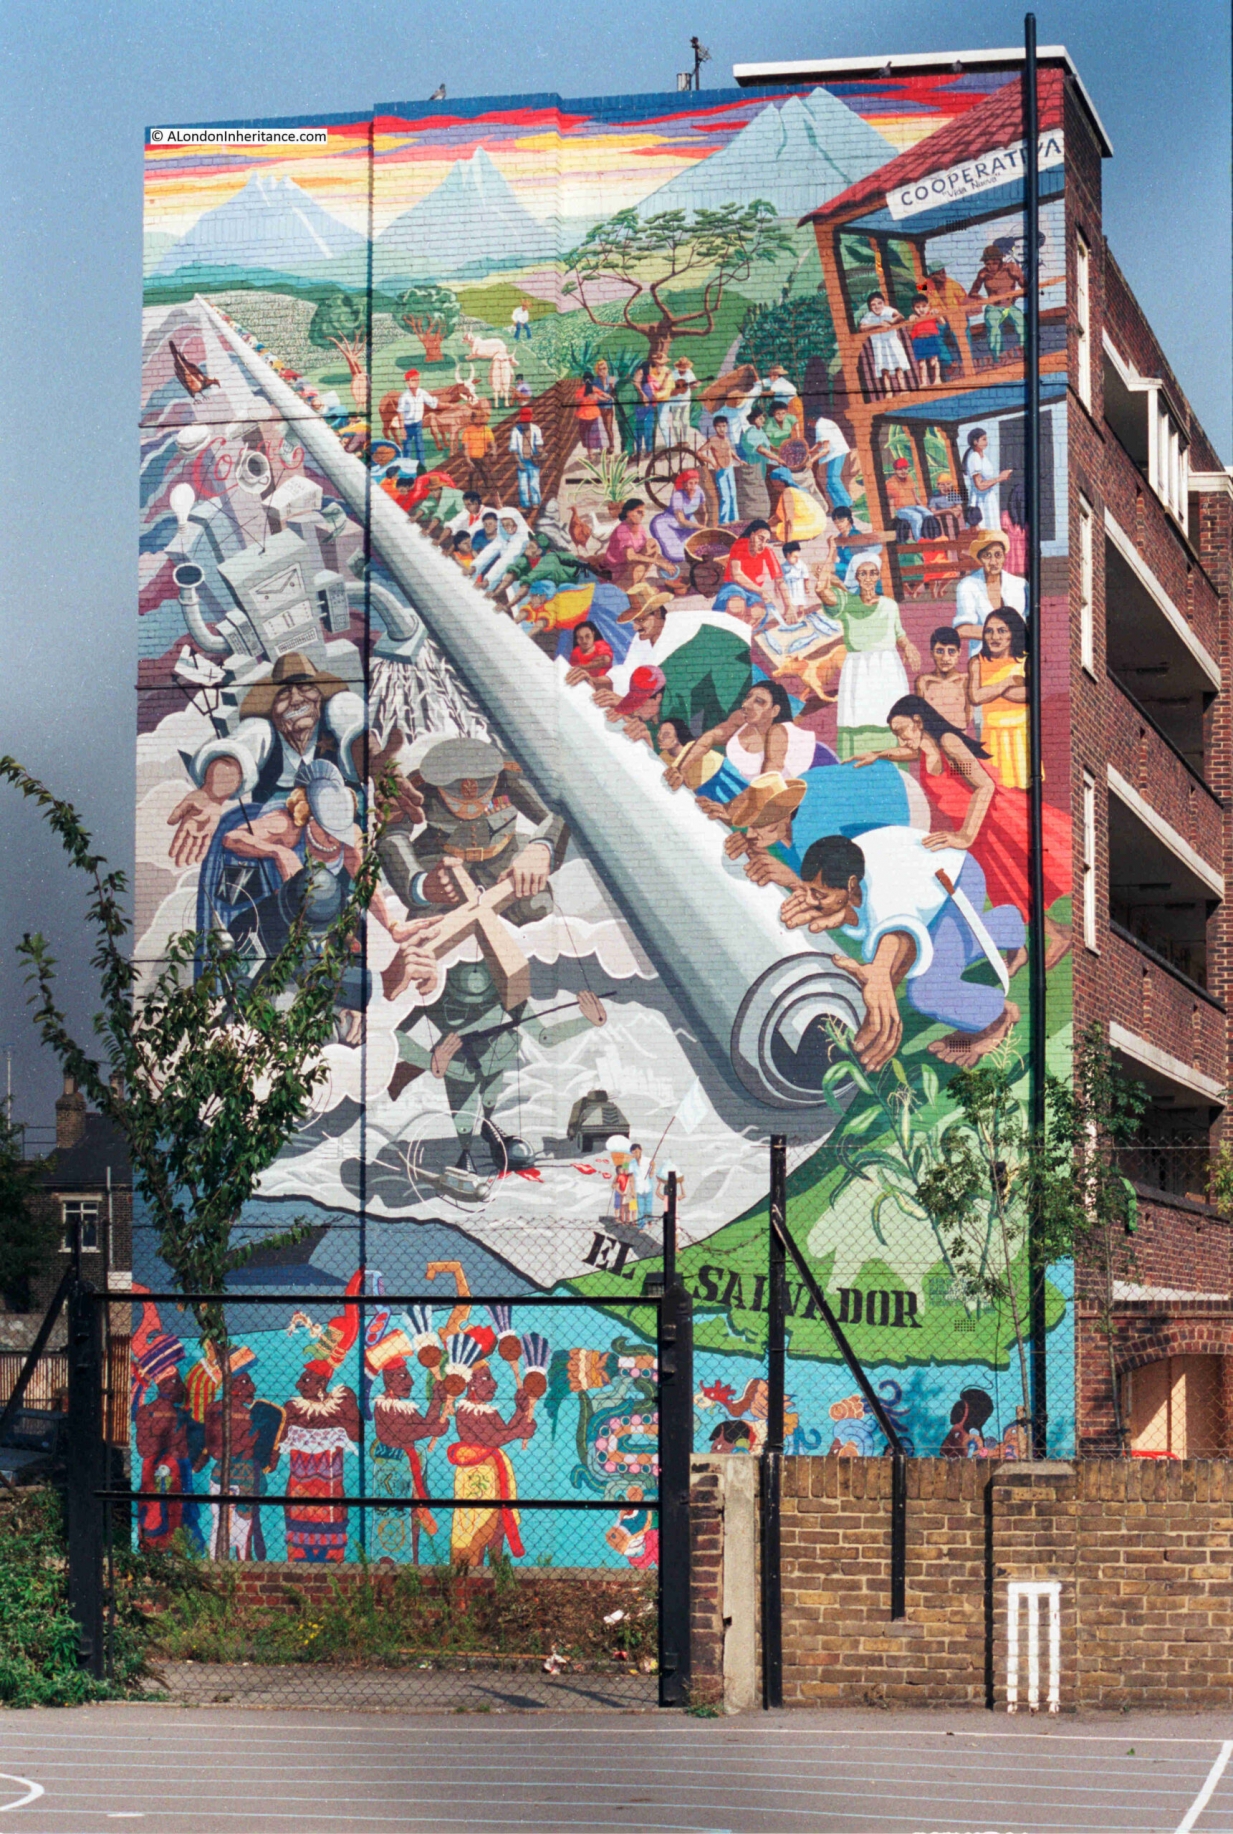 Mural, now faded, depicts a diverse community overcoming the forces of repression during the civil war in El Salvador